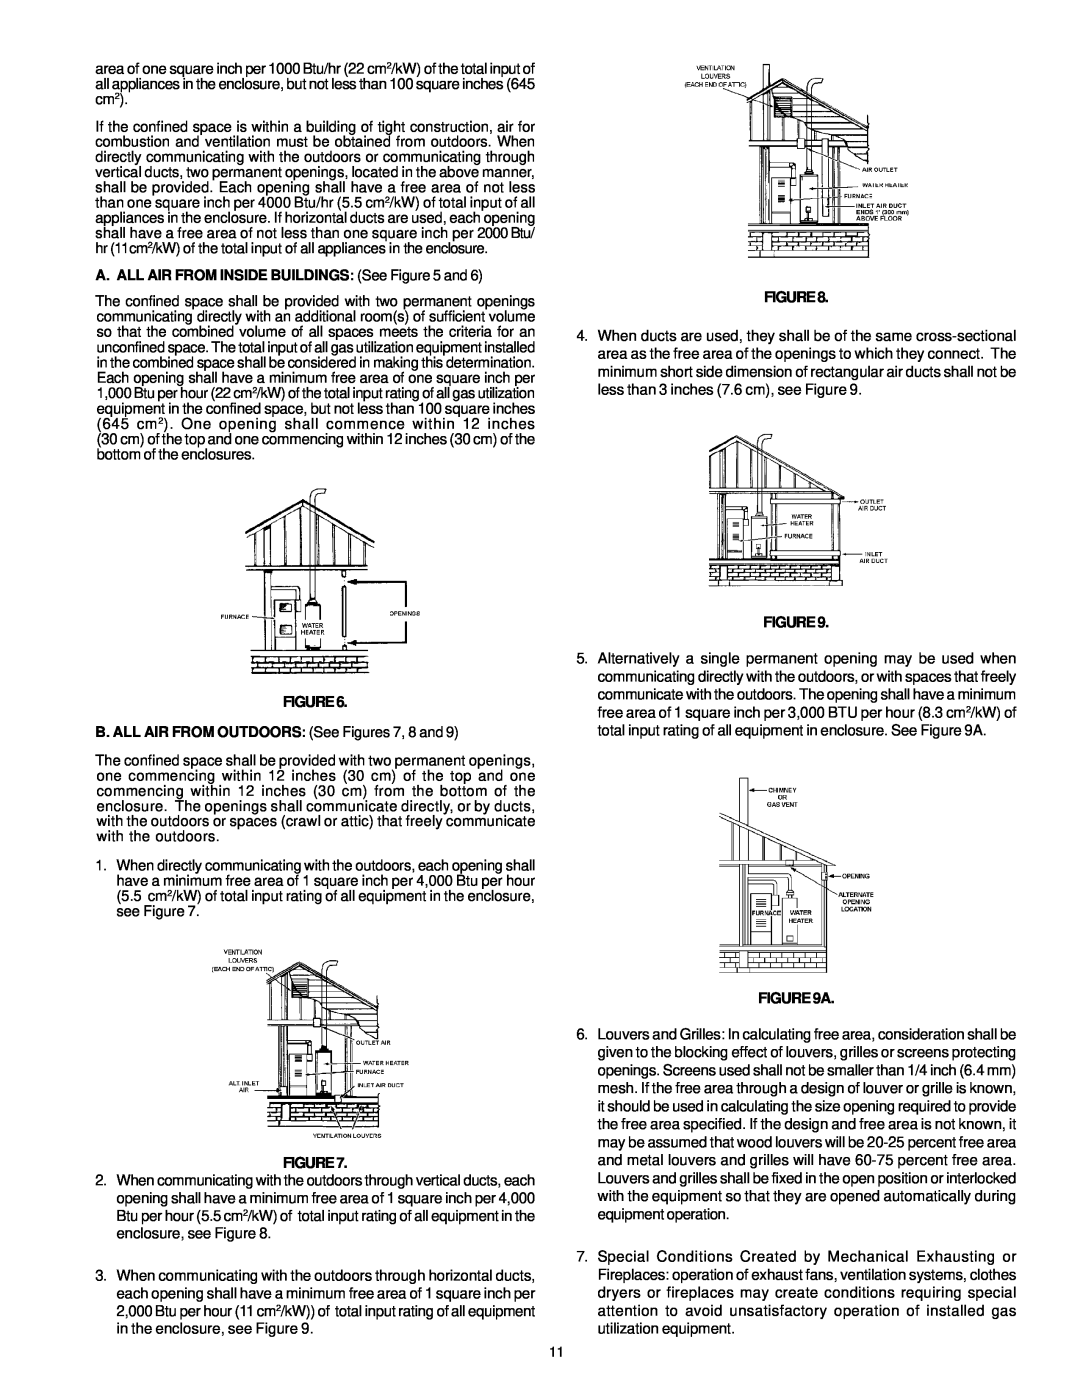 A.O. Smith ARGSS02708 A. ALL AIR FROM INSIDE BUILDINGS See and, B. ALL AIR FROM OUTDOORS See Figures 7, 8 and 